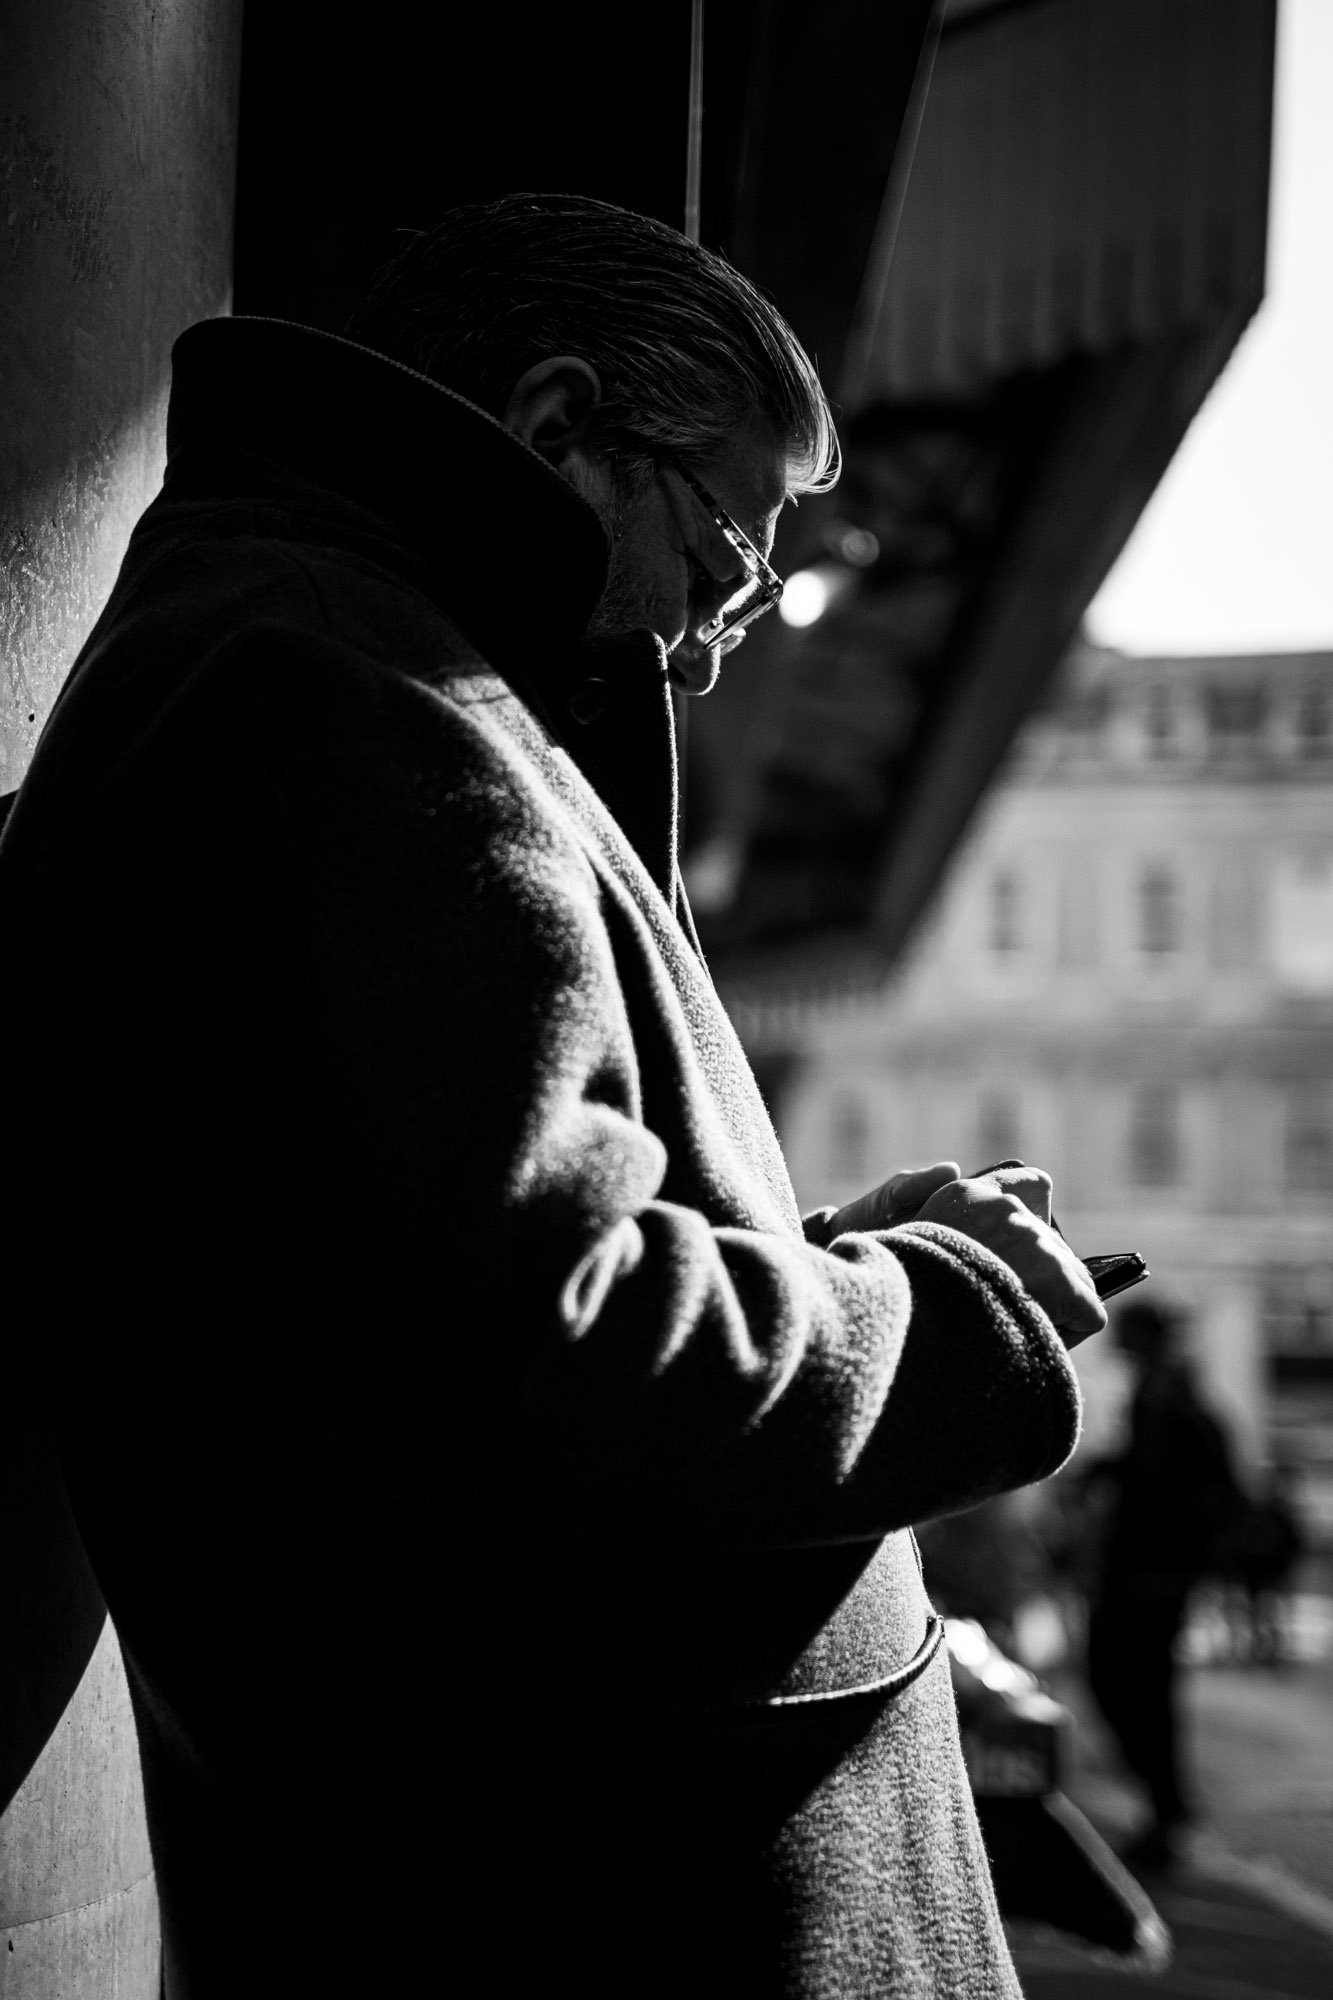 Street Photography - Black and White - Fujifilm - Andy Kirby - MrKirby Photography-08.jpg